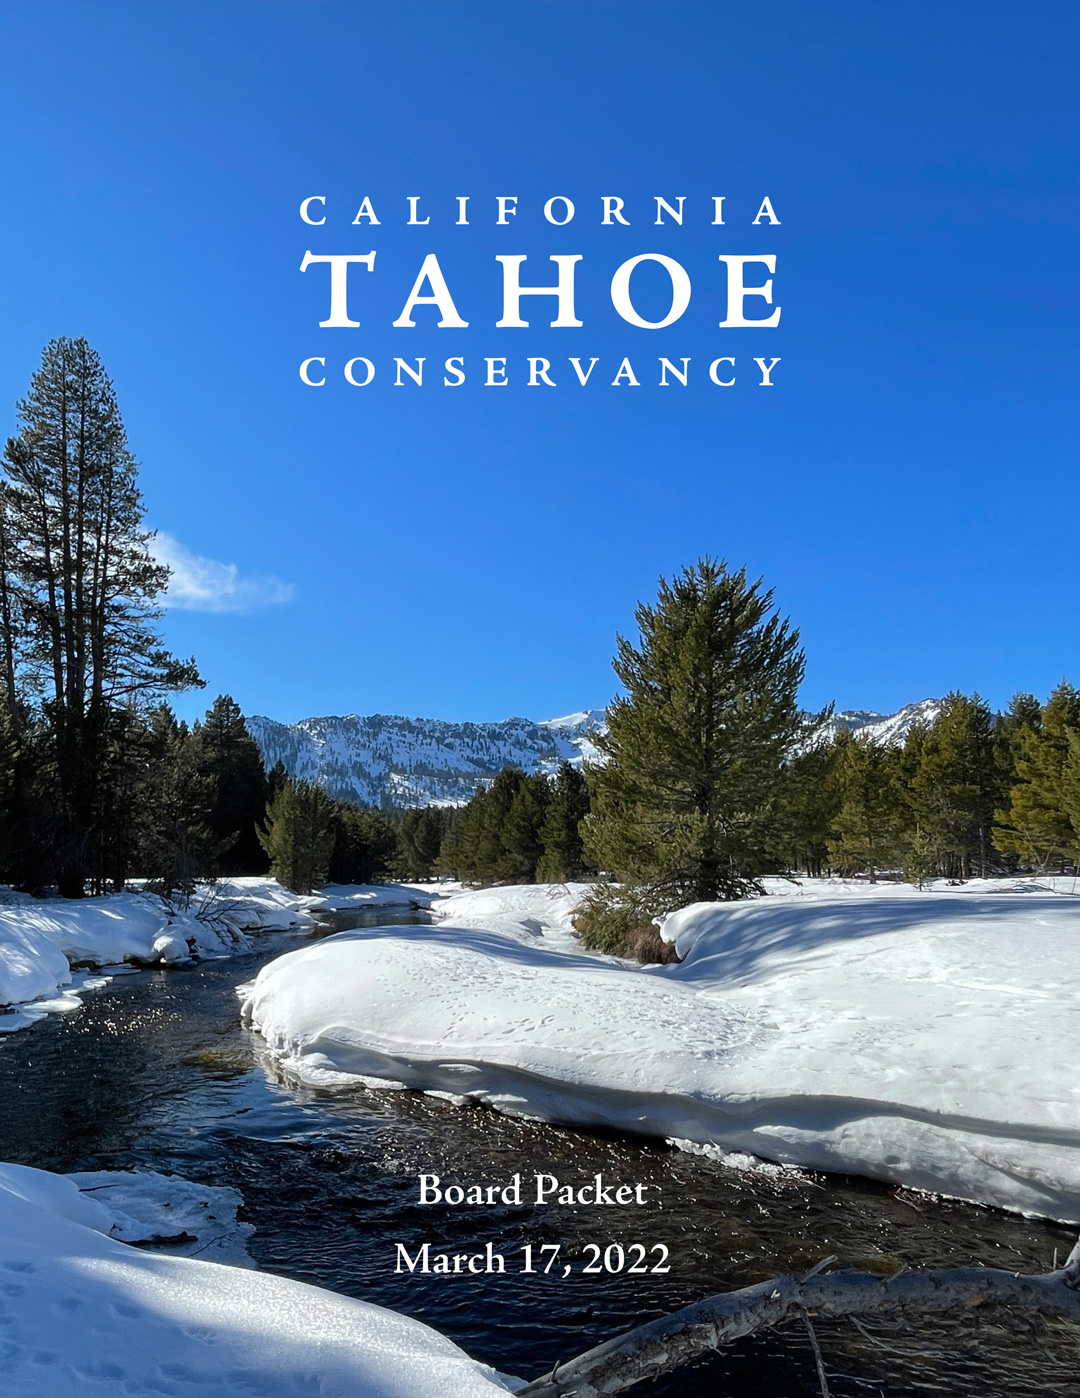 River and mountains, with text saying California Tahoe Conservancy - Board Packet March 17, 2022